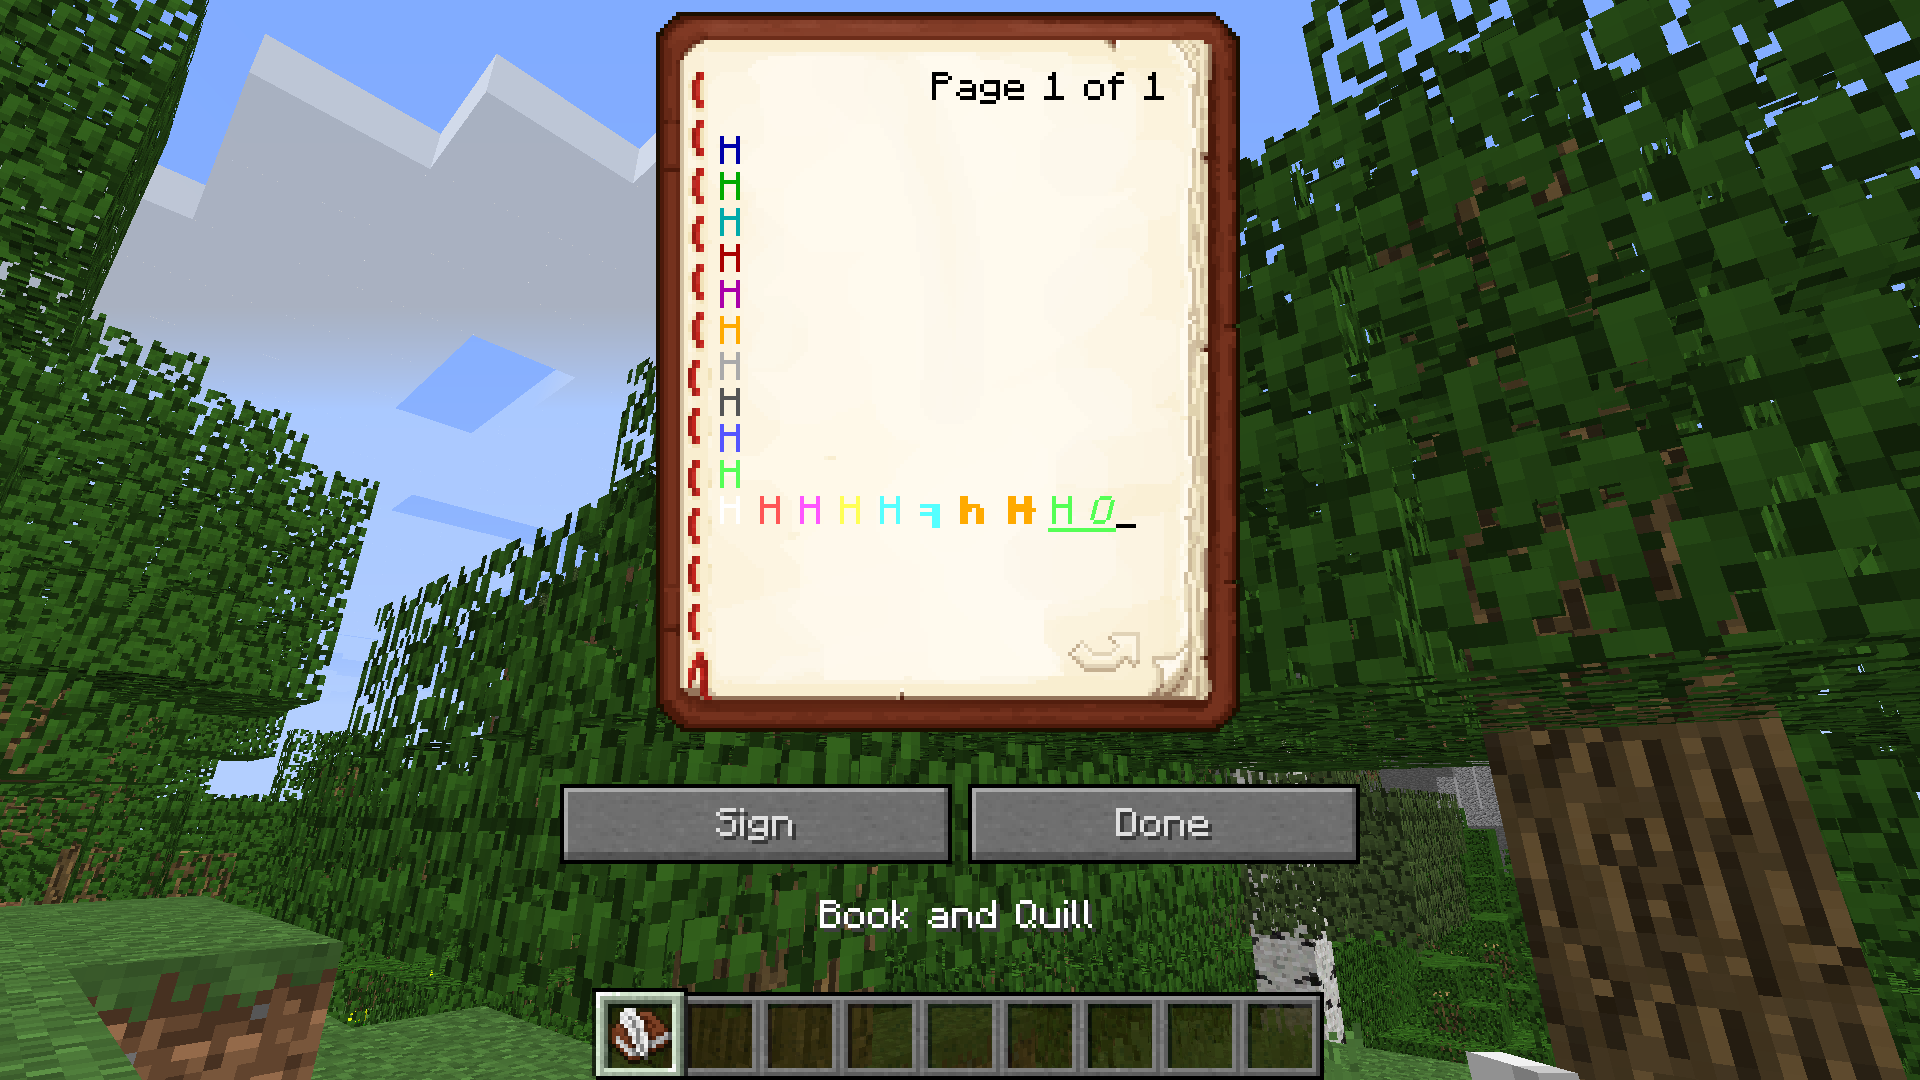 How To Make A Book And Quill In Mc